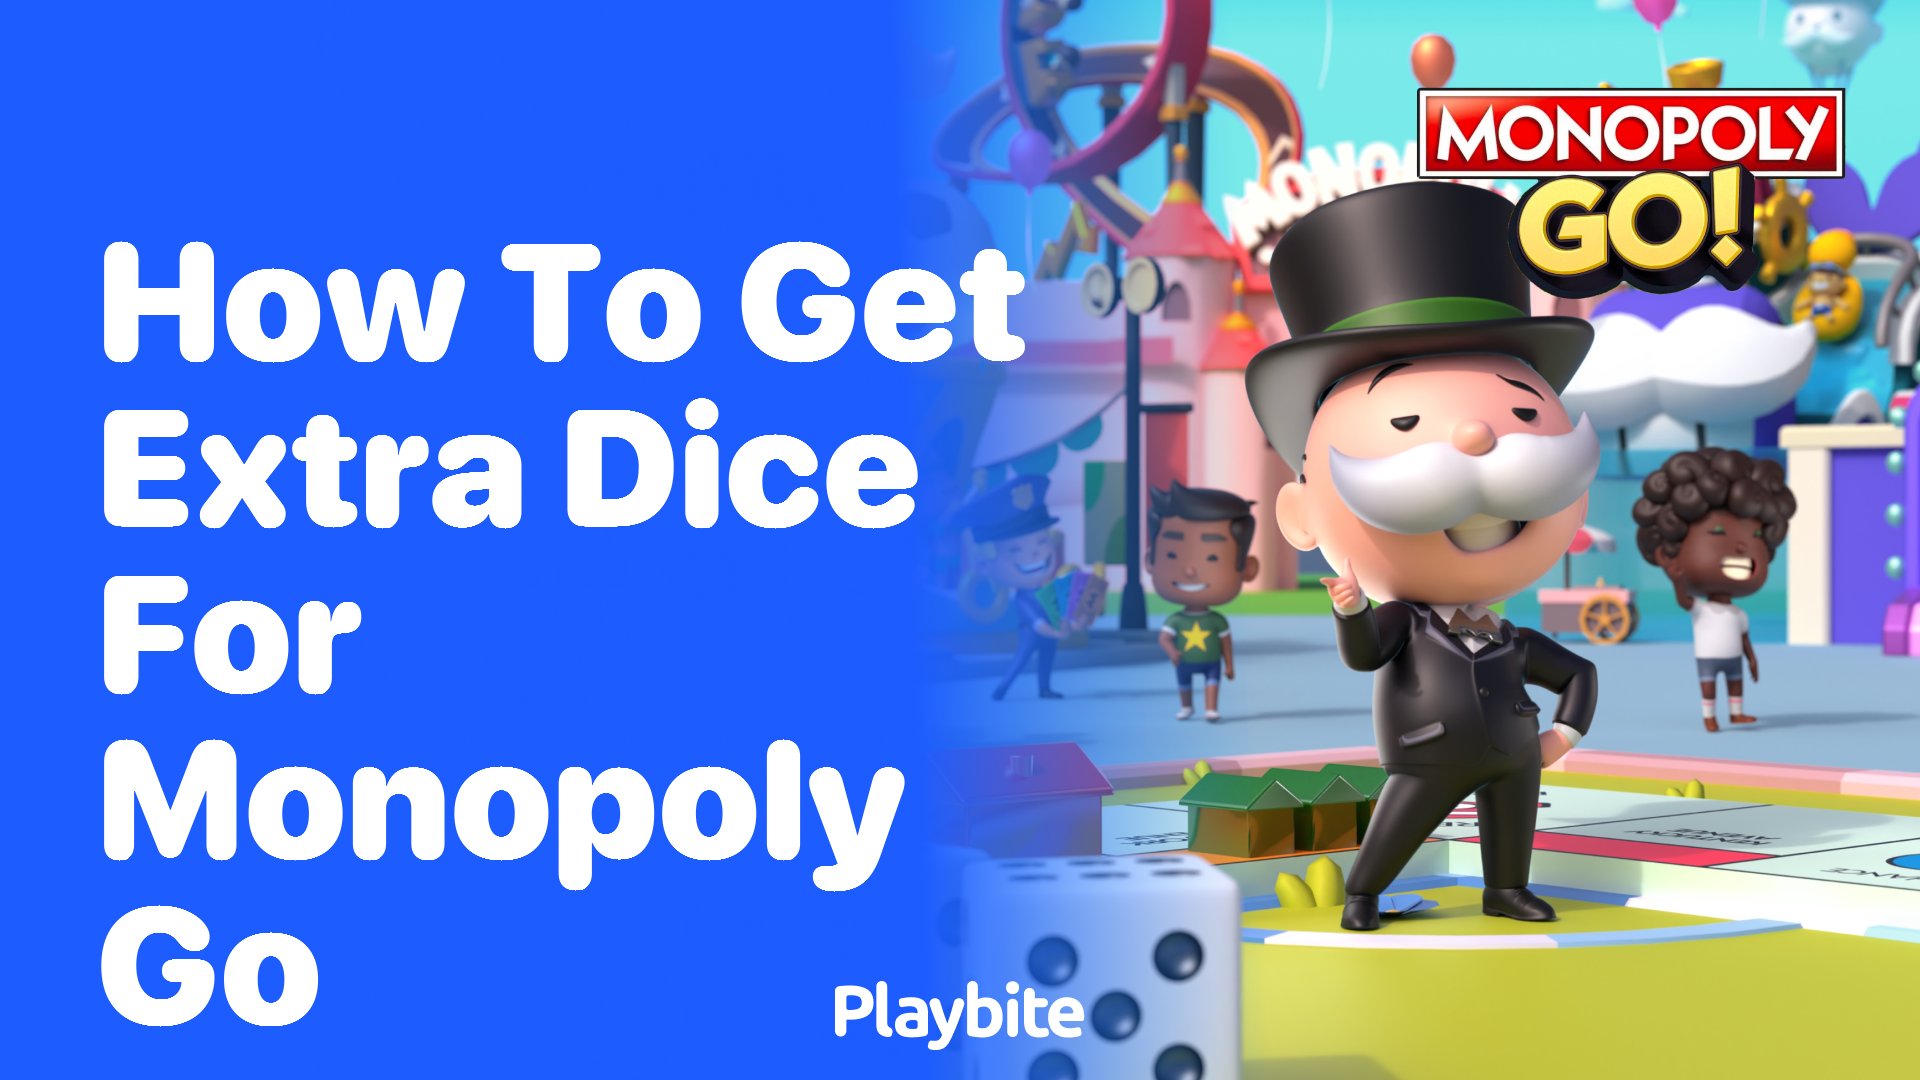 How to Get Extra Dice for Monopoly Go